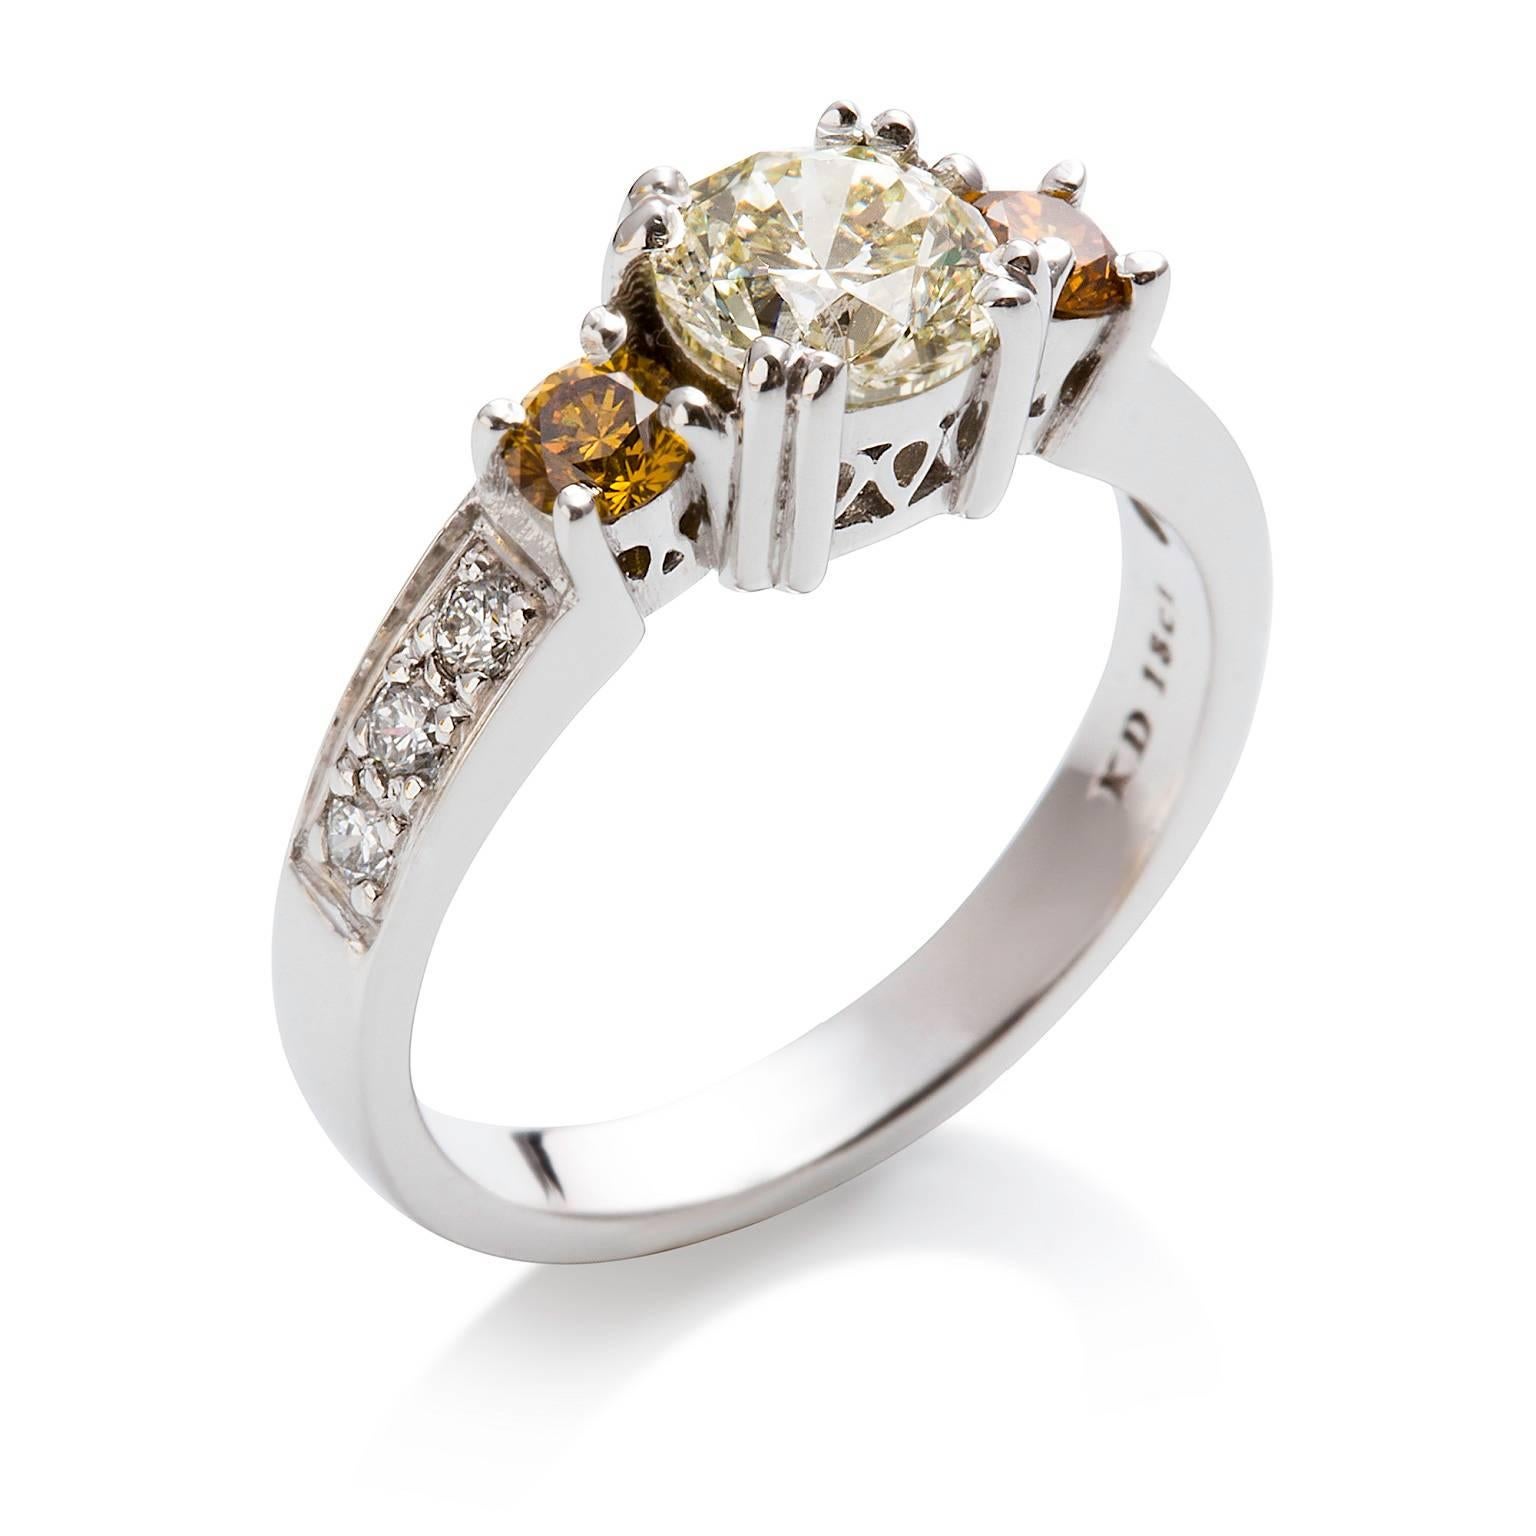 Oro & Bianca Diamante Ring

This eye-catching ring features a large white diamond which has an attractive smaller golden diamond on either side. The band is bead set with petite white diamonds also.

Round brilliant cut diamond: M colour, SI1